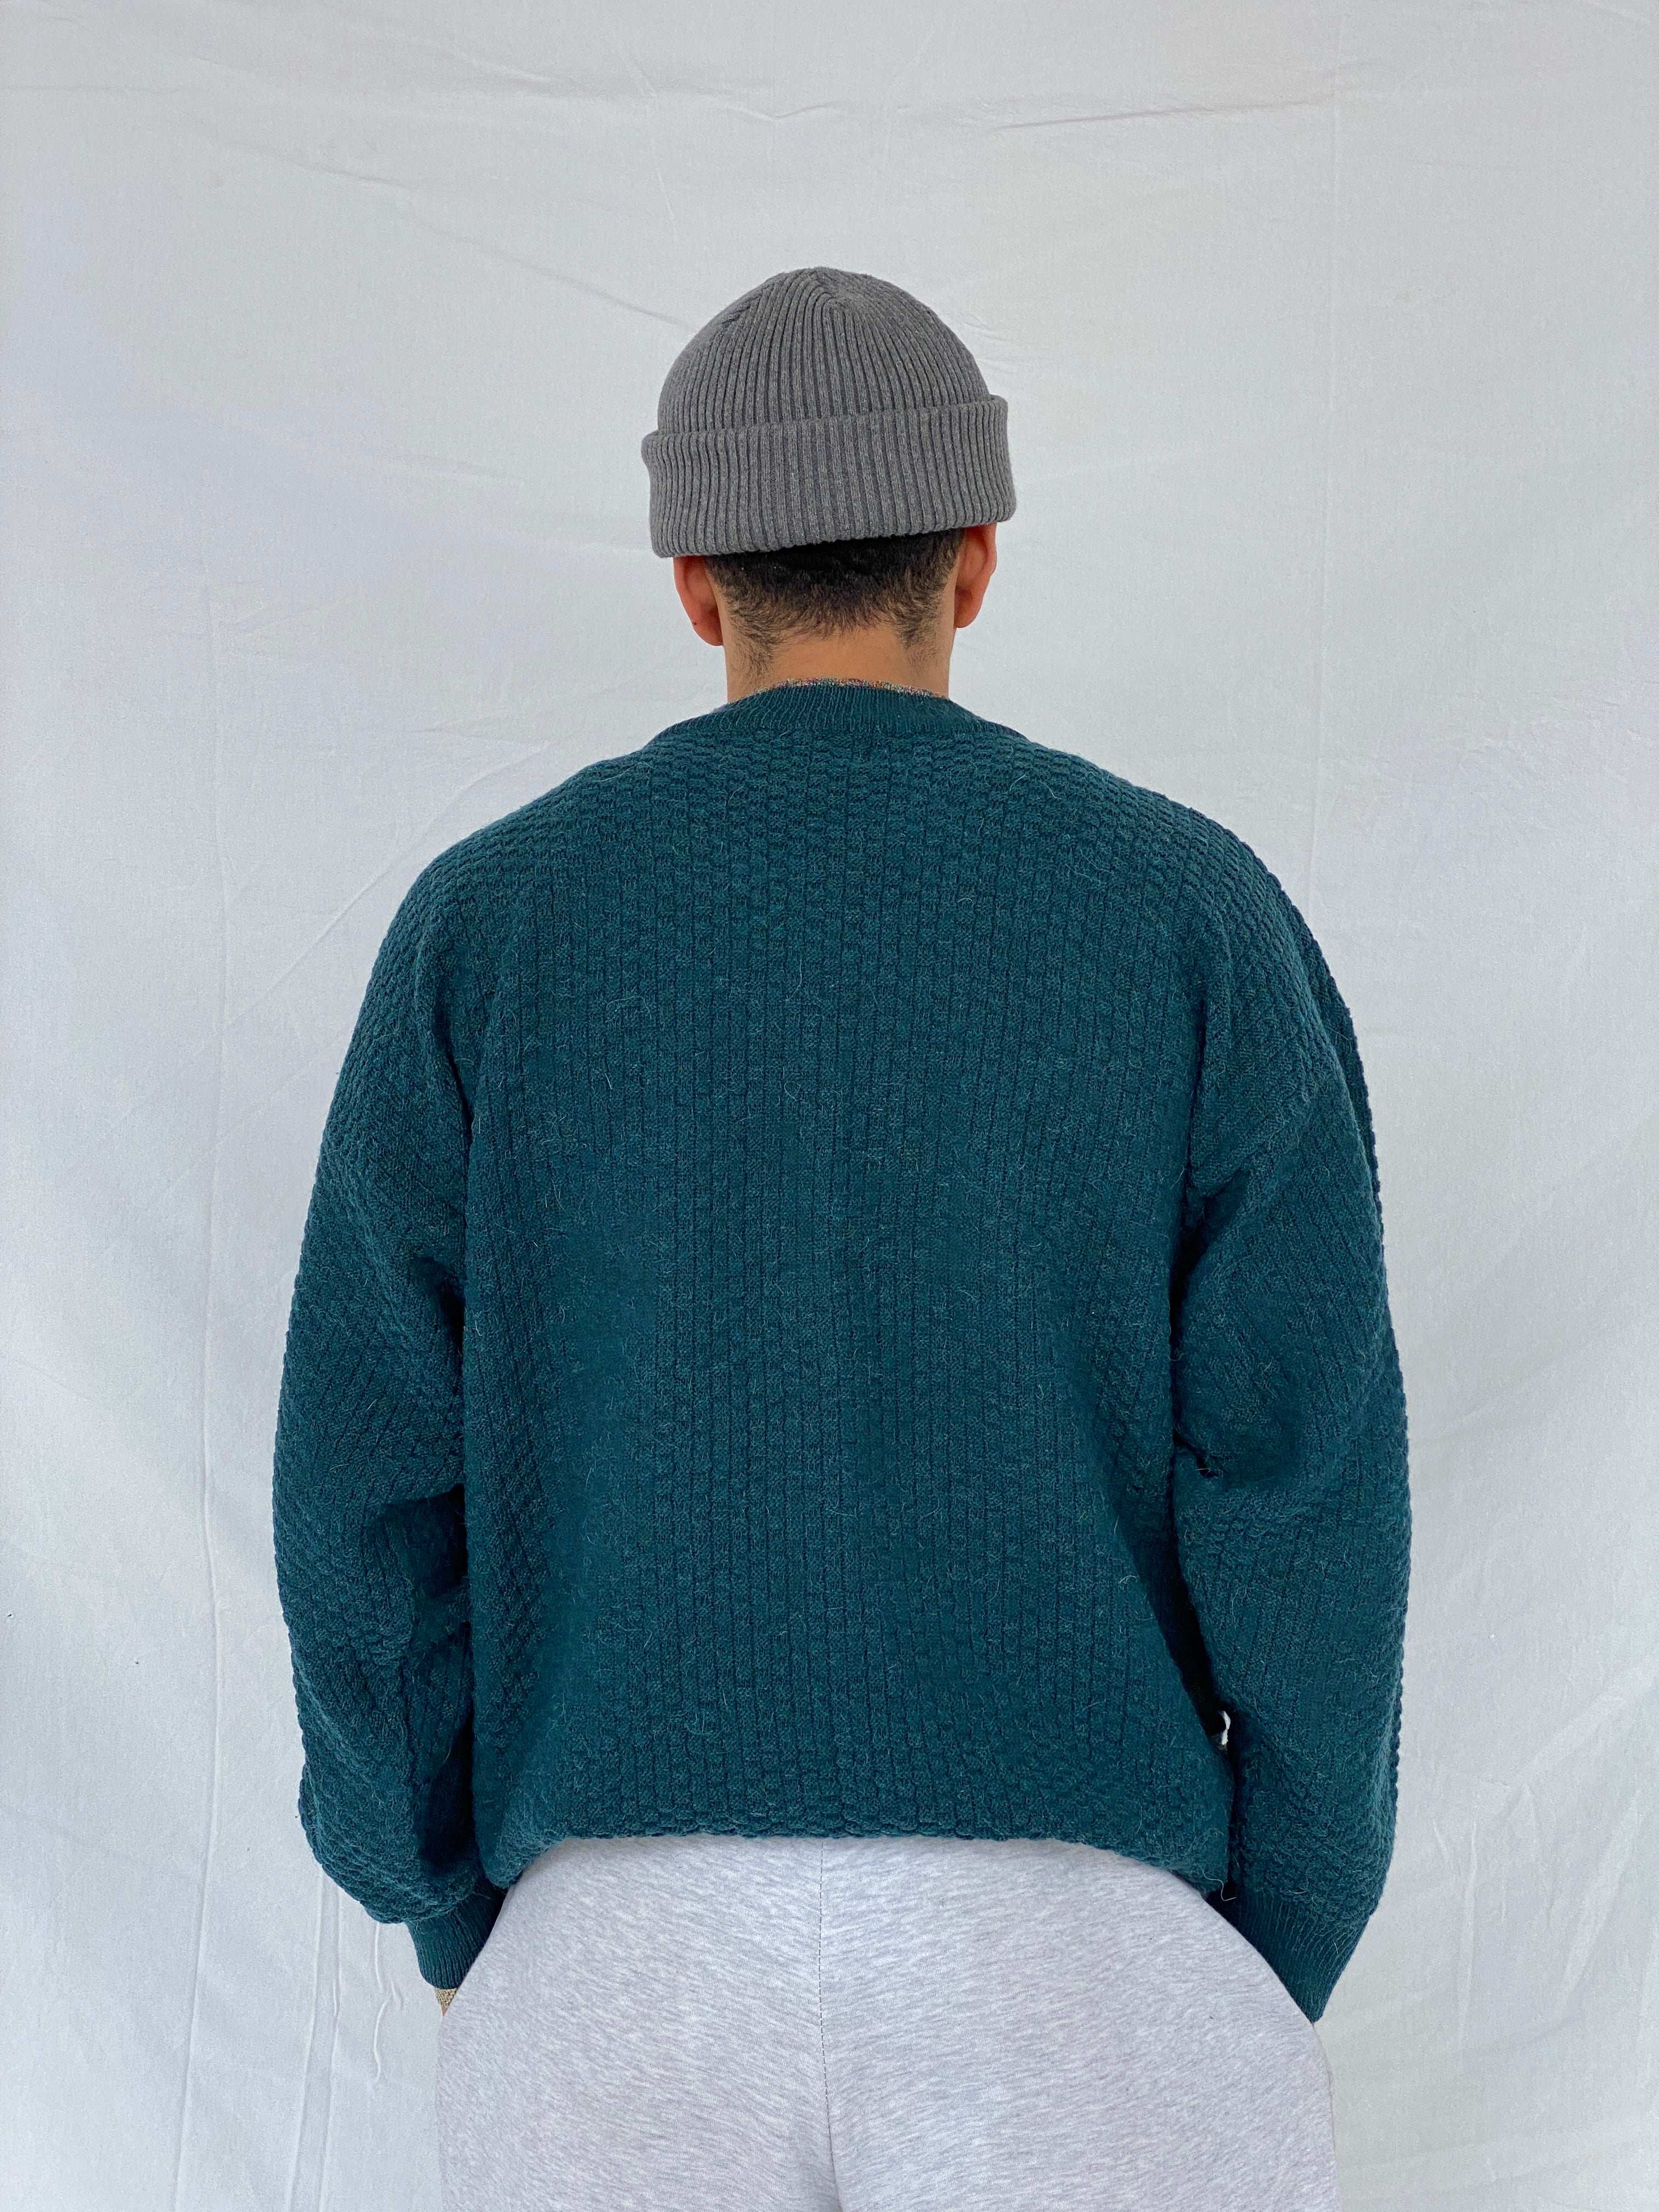 Vintage Orient Green Knitted Sweater - Size M/L - Balagan Vintage Sweater 80s, 90s, Abdullah, knitted sweater, vintage sweater